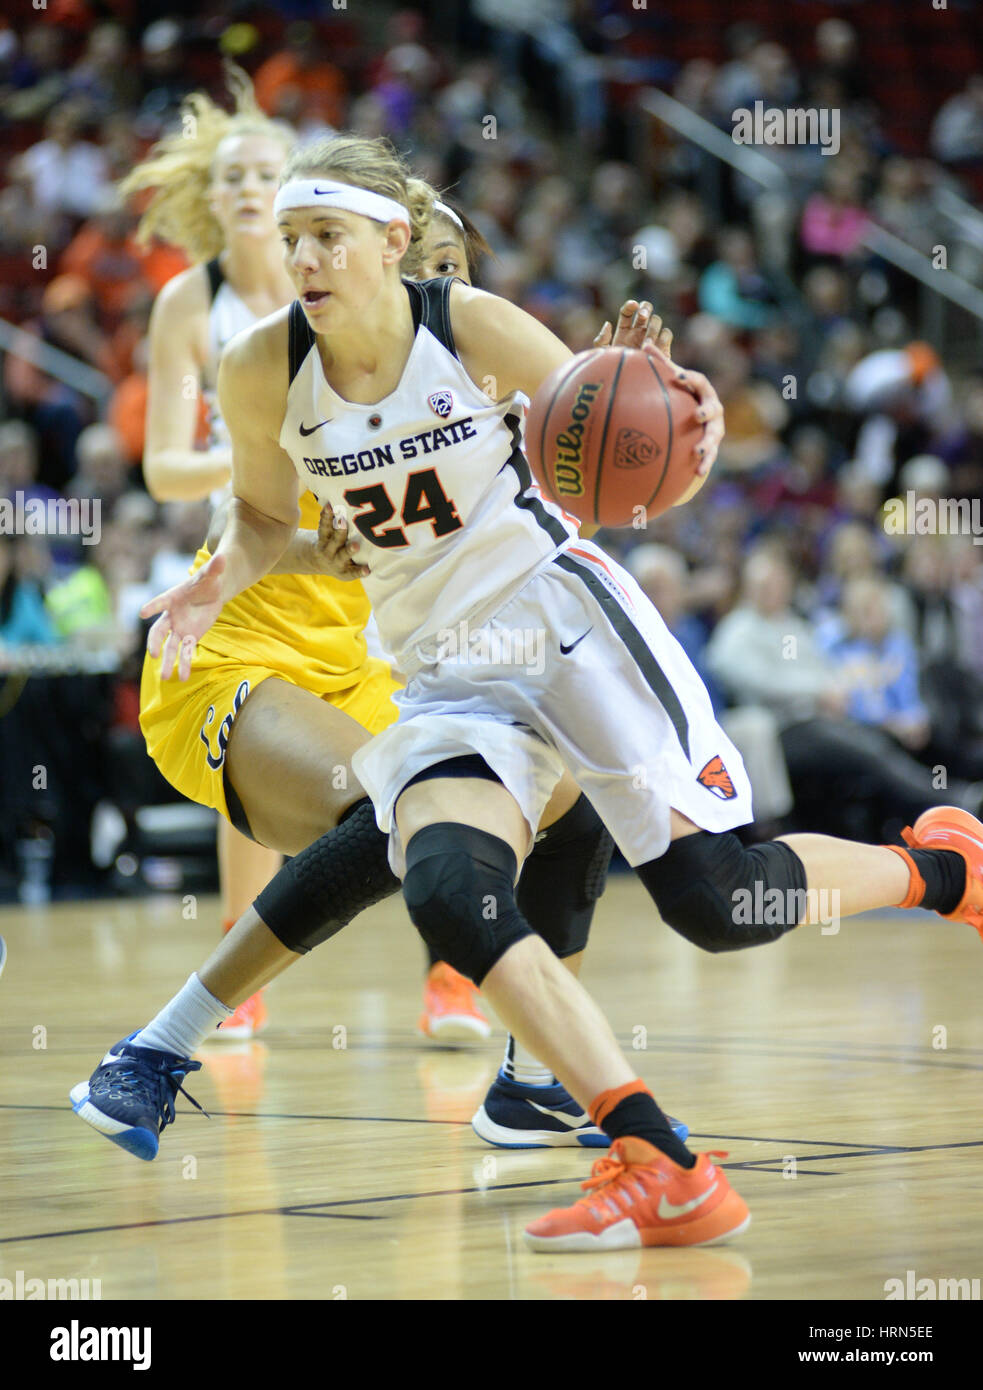 Seattle, WA, USA. 3rd Mar, 2017. OSU's point guard Sydney Wiese (24) drives to the basket during a PAC12 women's tournament game between the Oregon State Beavers and the Cal Bears. The game was played at Key Arena in Seattle, WA. Jeff Halstead/CSM/Alamy Live News Stock Photo